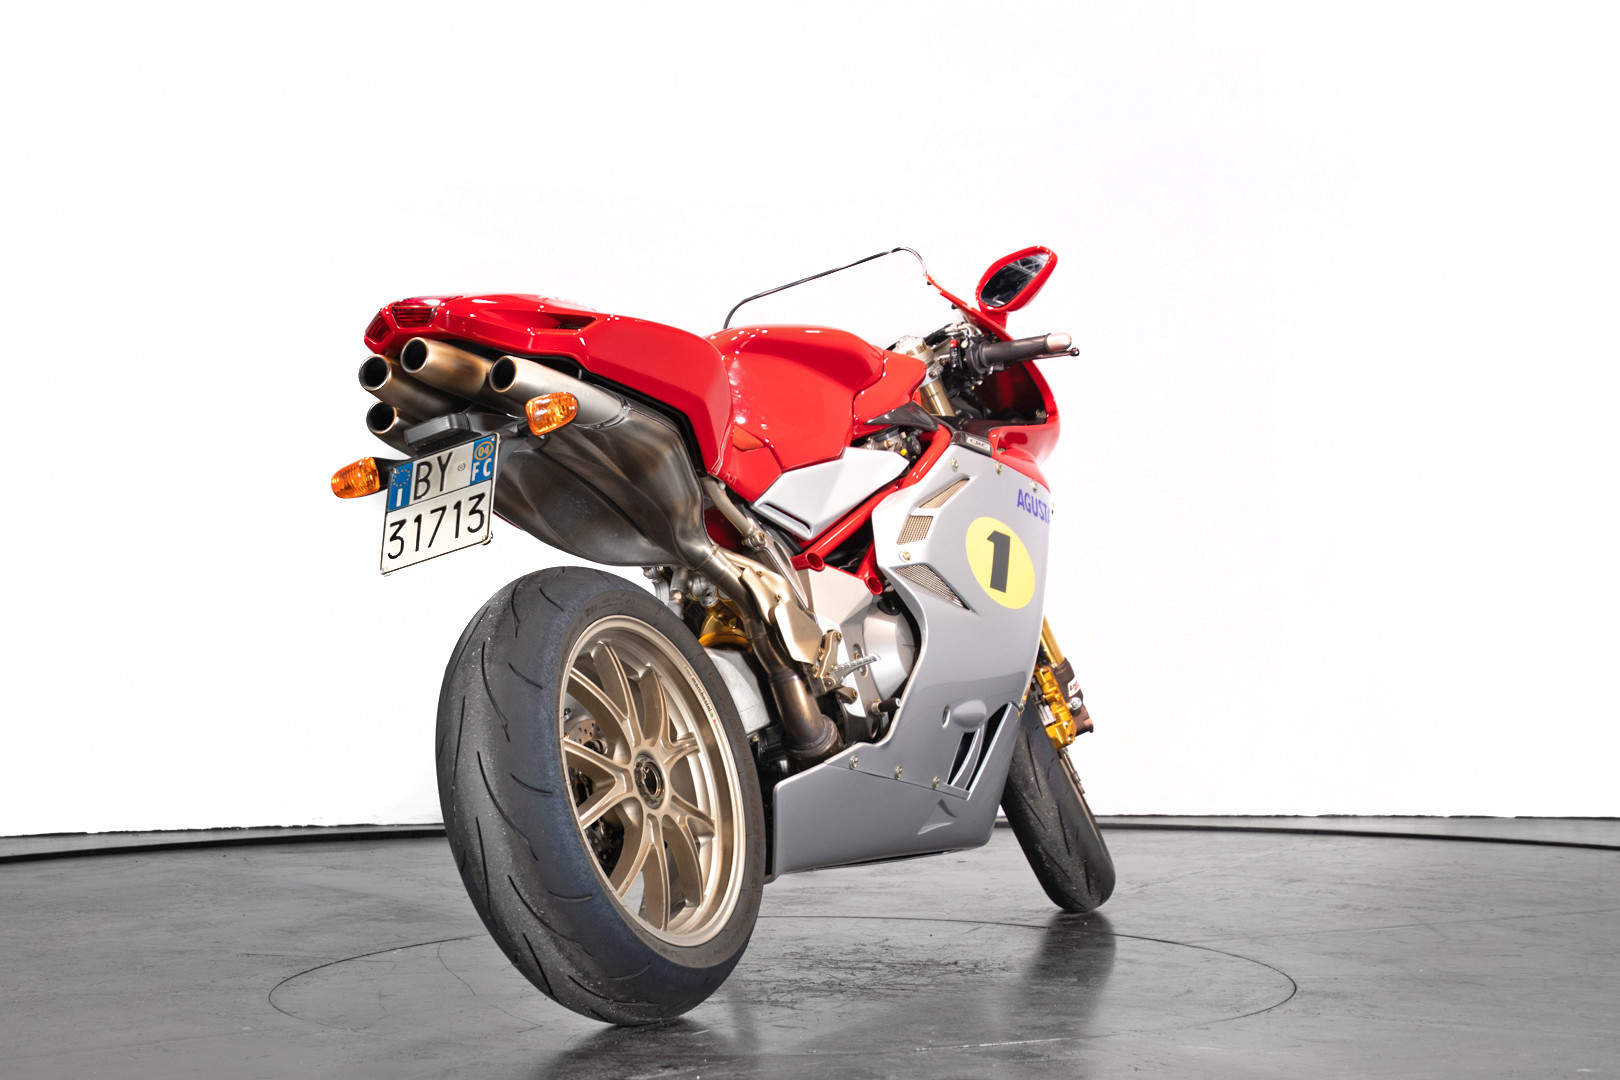 2004 Mv agusta Brutale for Sale in United States